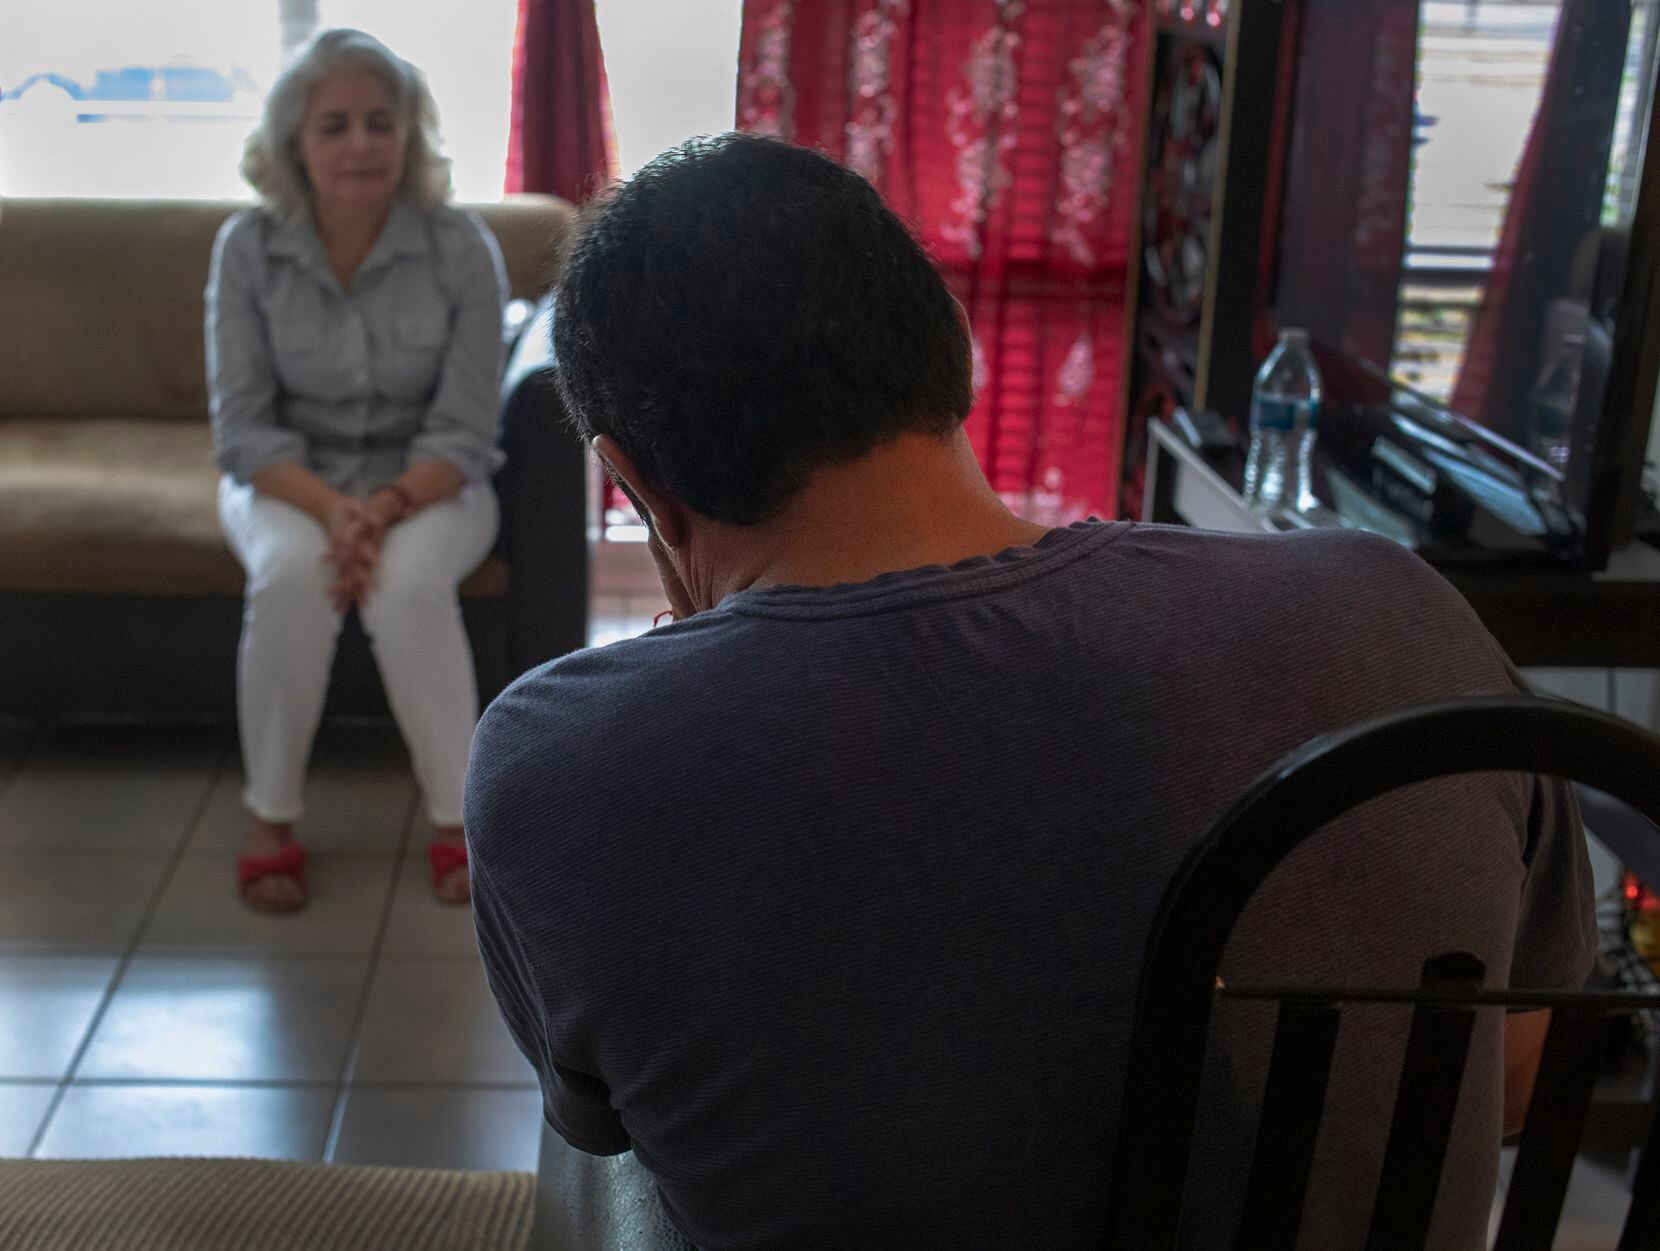 August 30, 2019
Max Trejo recounts the story of his detention by ICE to Socorro Perales, an...